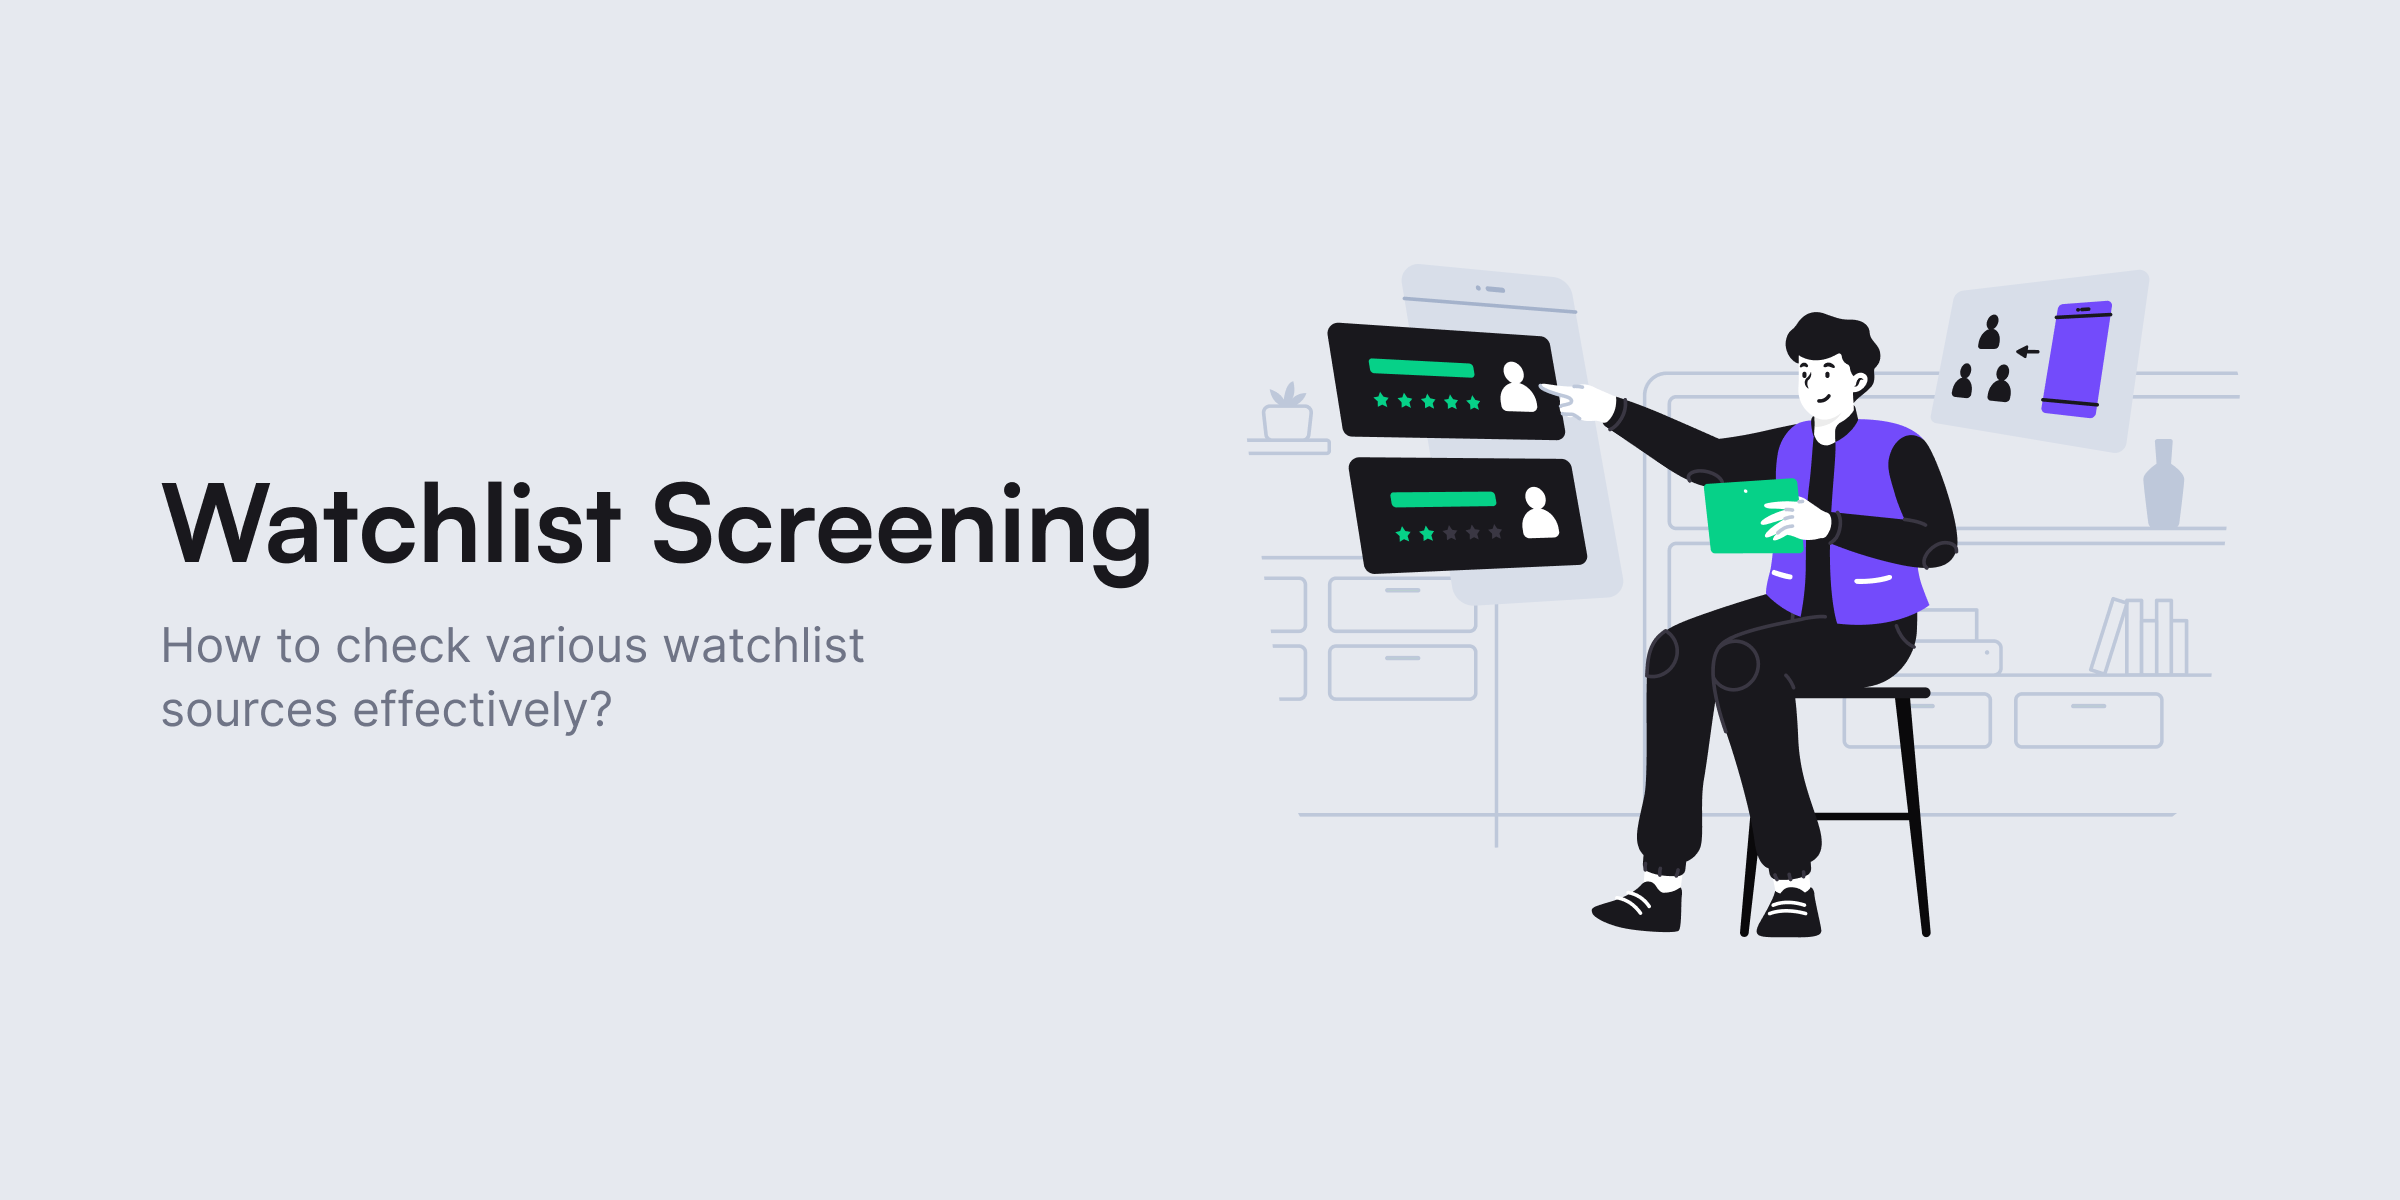 Global Watchlist Screening: A complete checklist to keep your business compliant